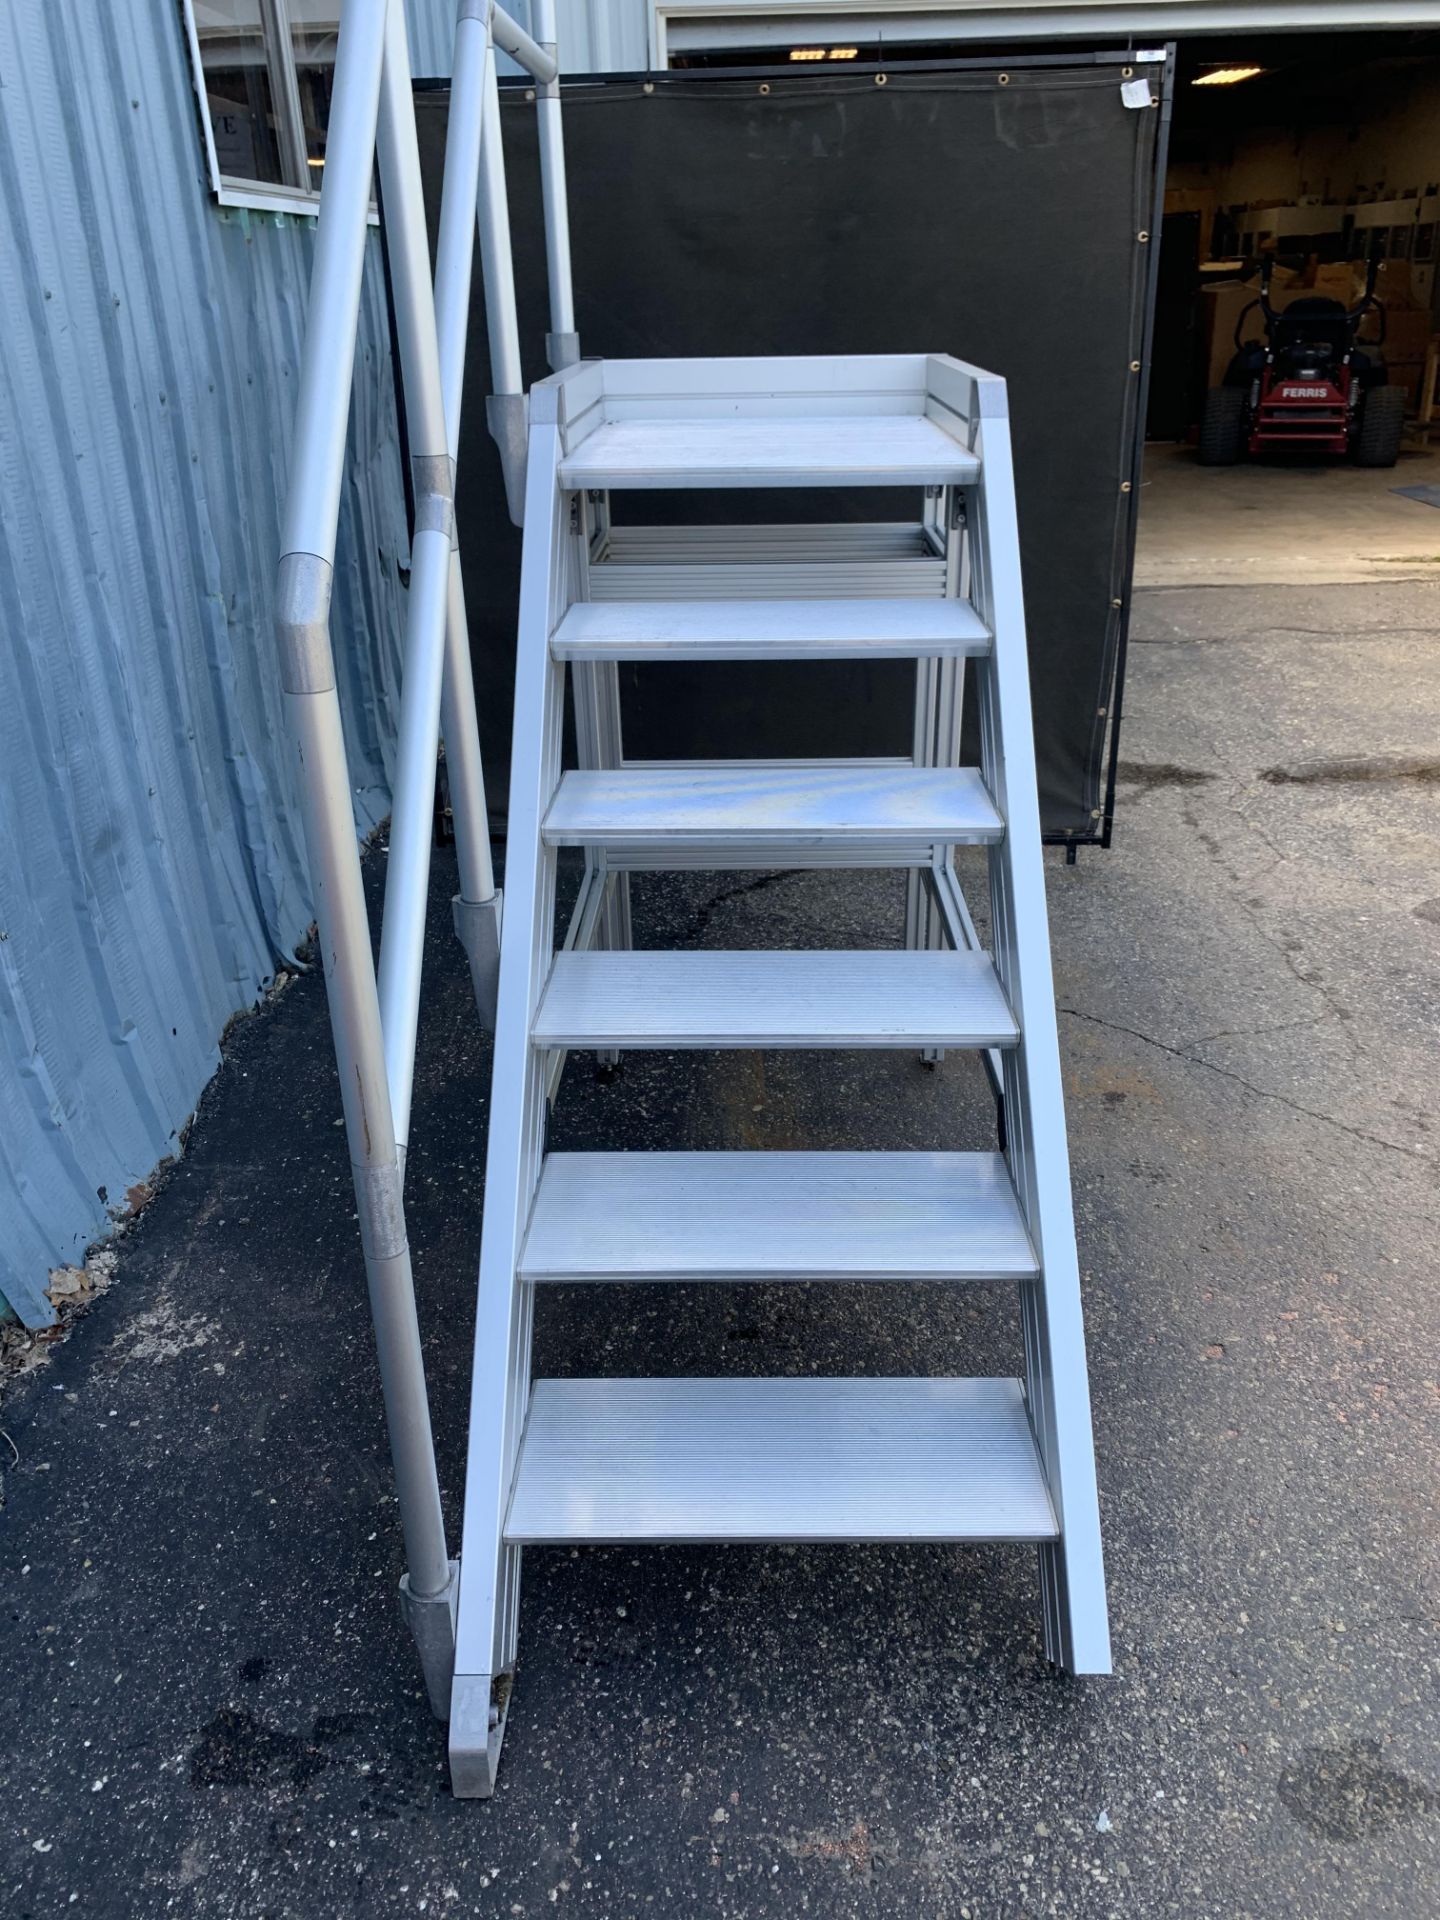 UNKNOWN BRAND ALUMINUM STAIRS WITH RAIL, 6-STEPS, TOP PLATFORM STEP 50" HIGH - Image 3 of 8